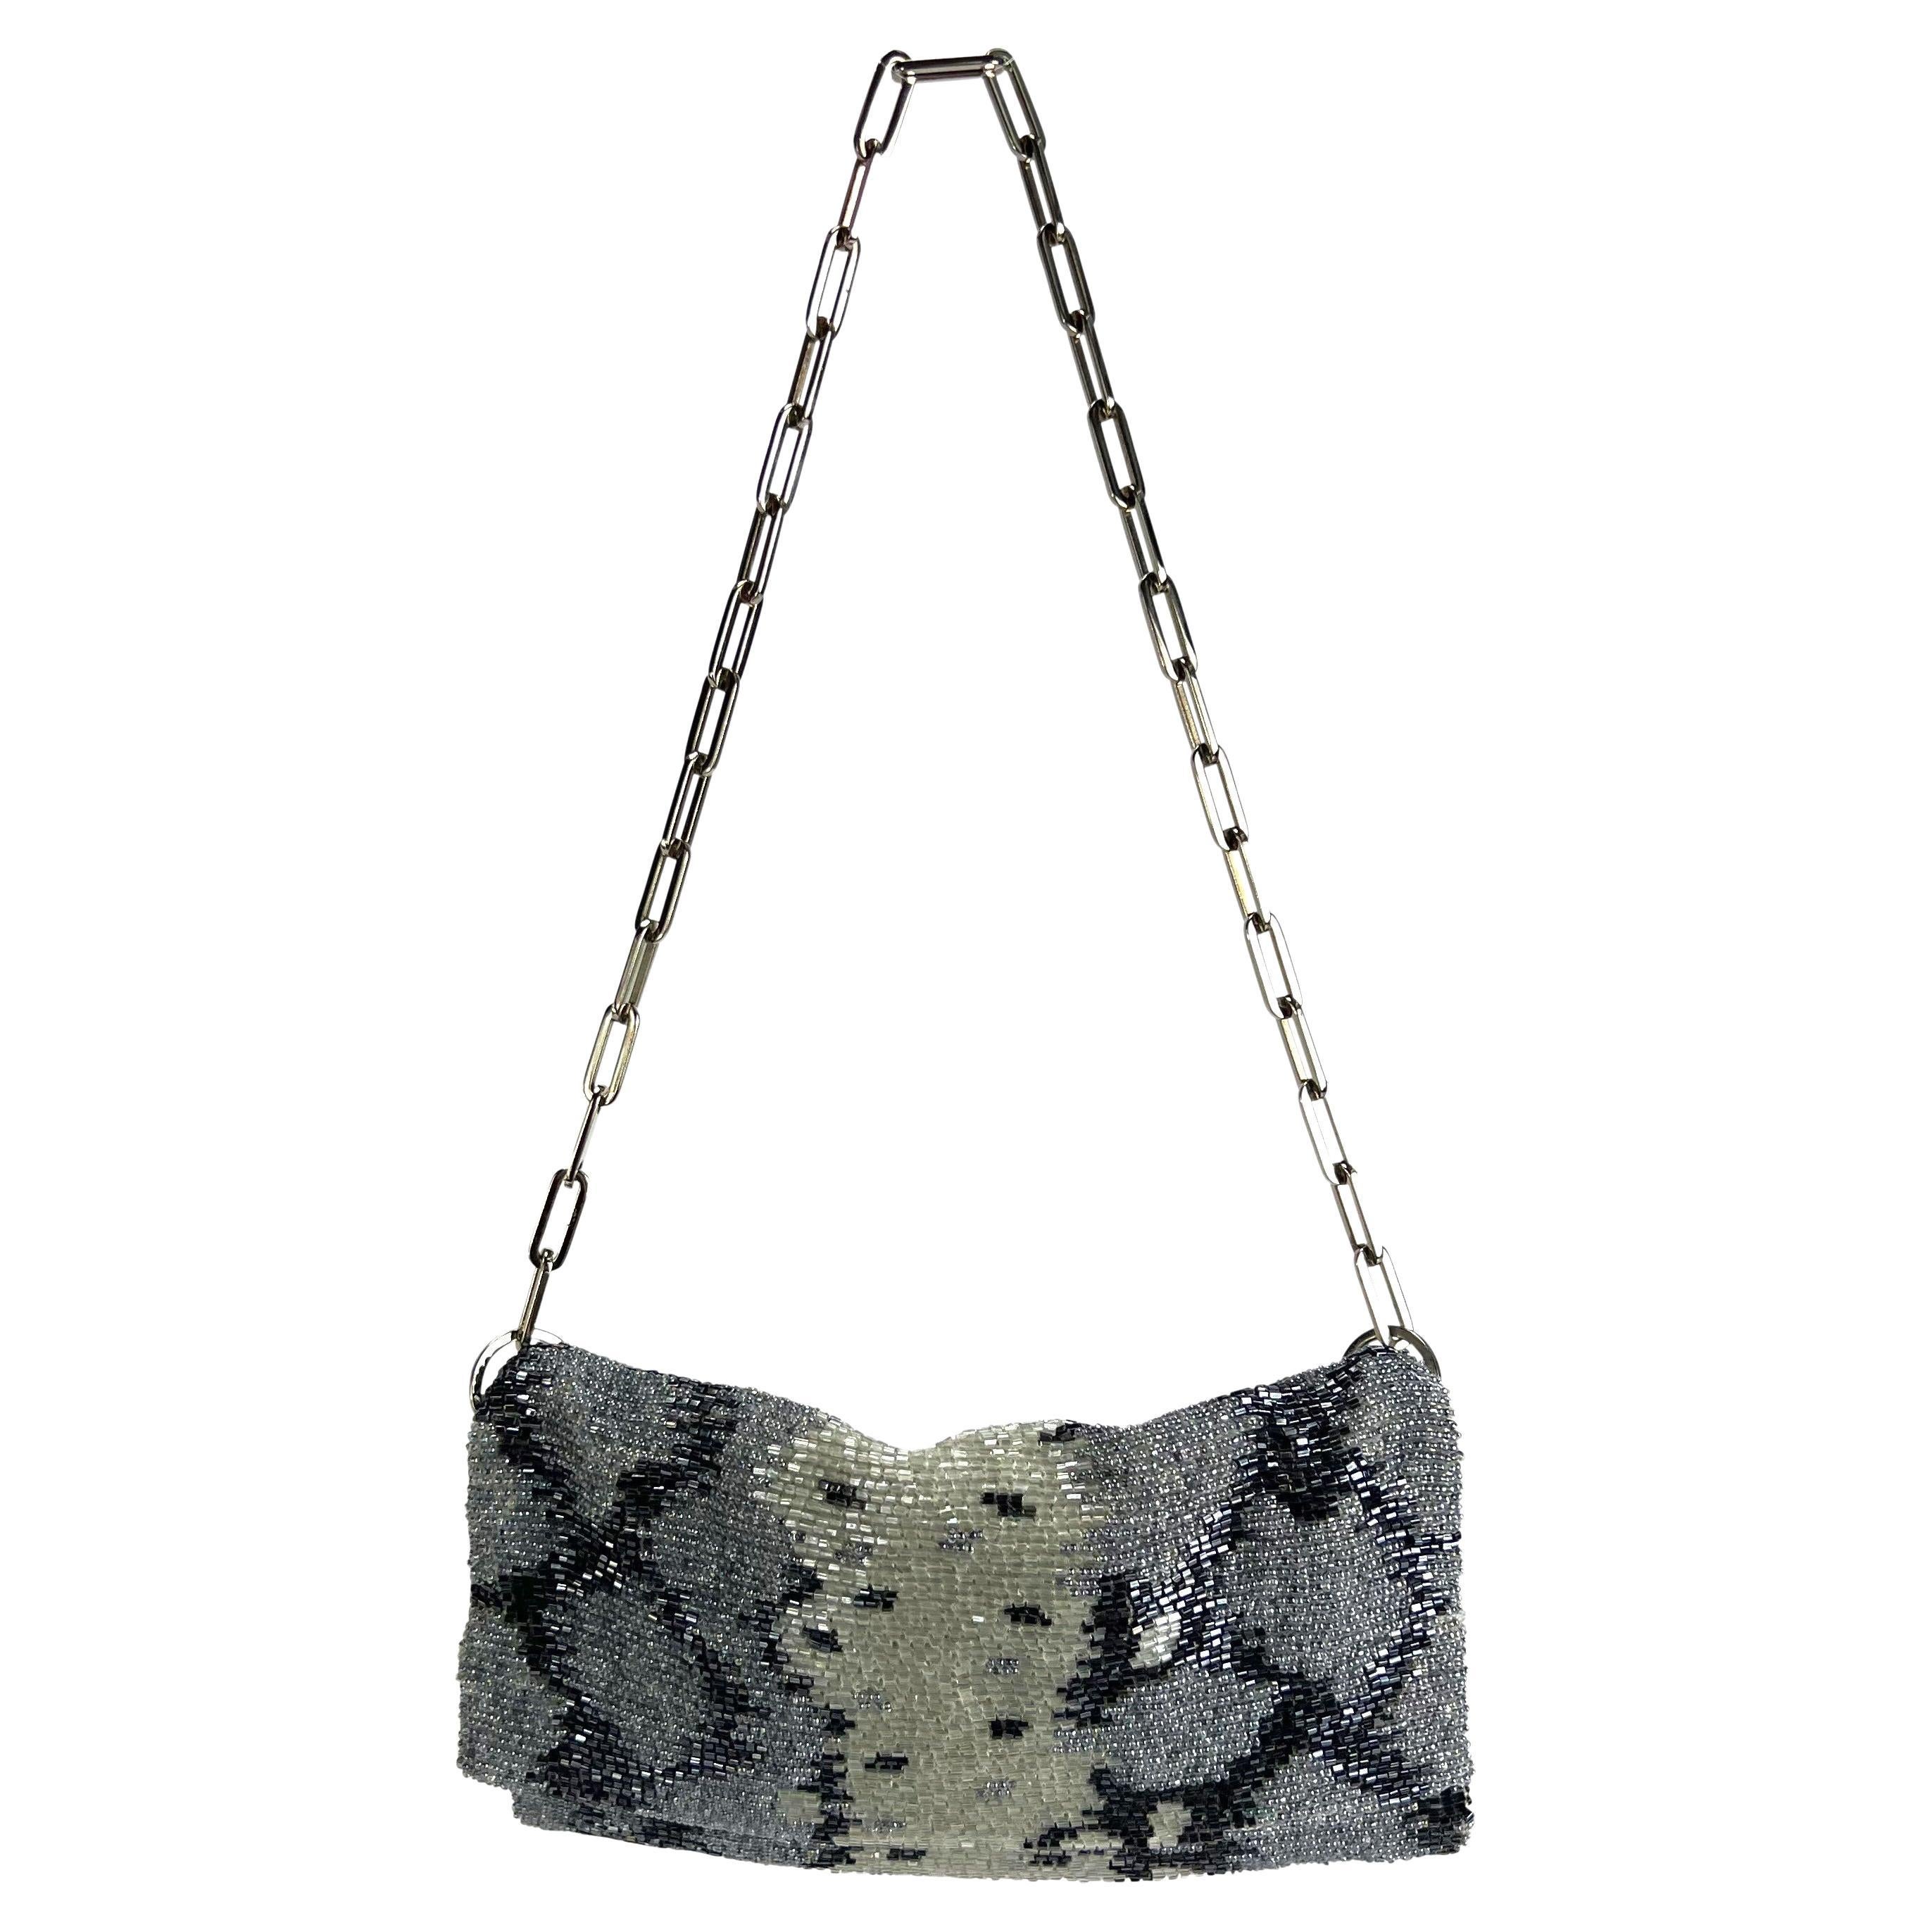 S/S 2000 Gucci by Tom Ford Grey Beaded Snake Skin Print Chain Flap Bag  For Sale